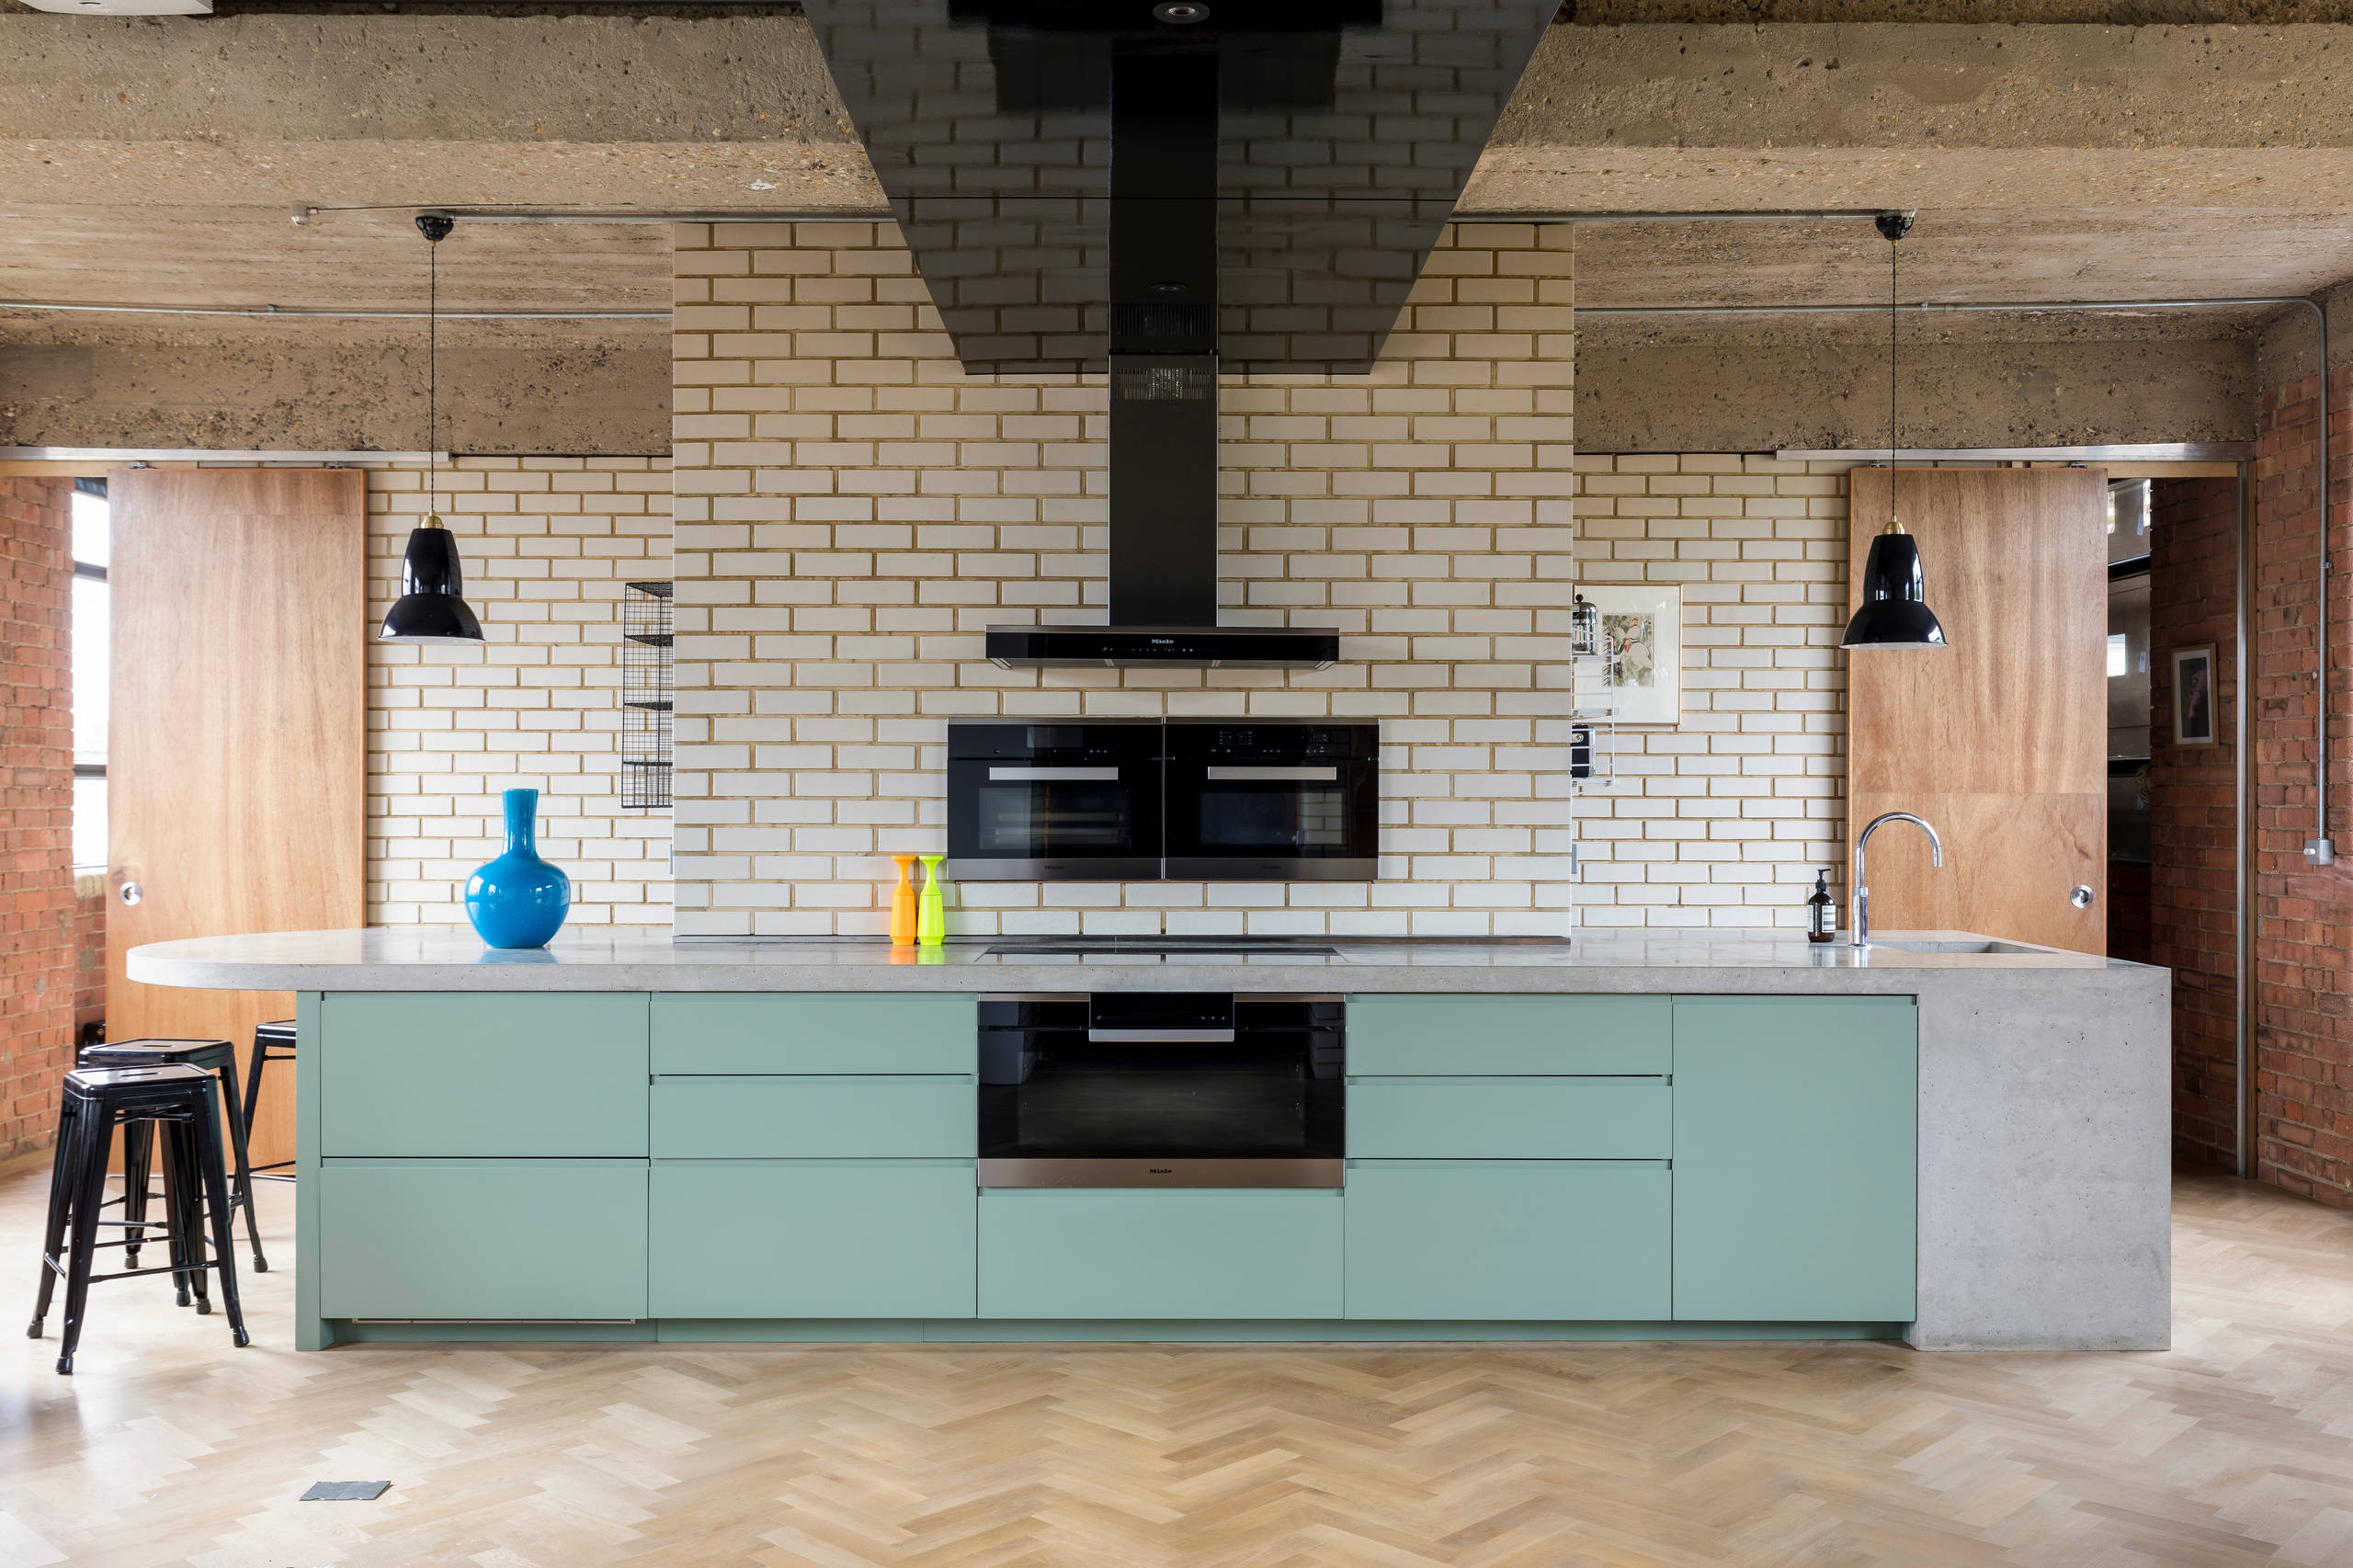 Industrial Loft Kitchen With Turquoise Cabinets and Lime Green Backsplash, Beauty Is Abundant